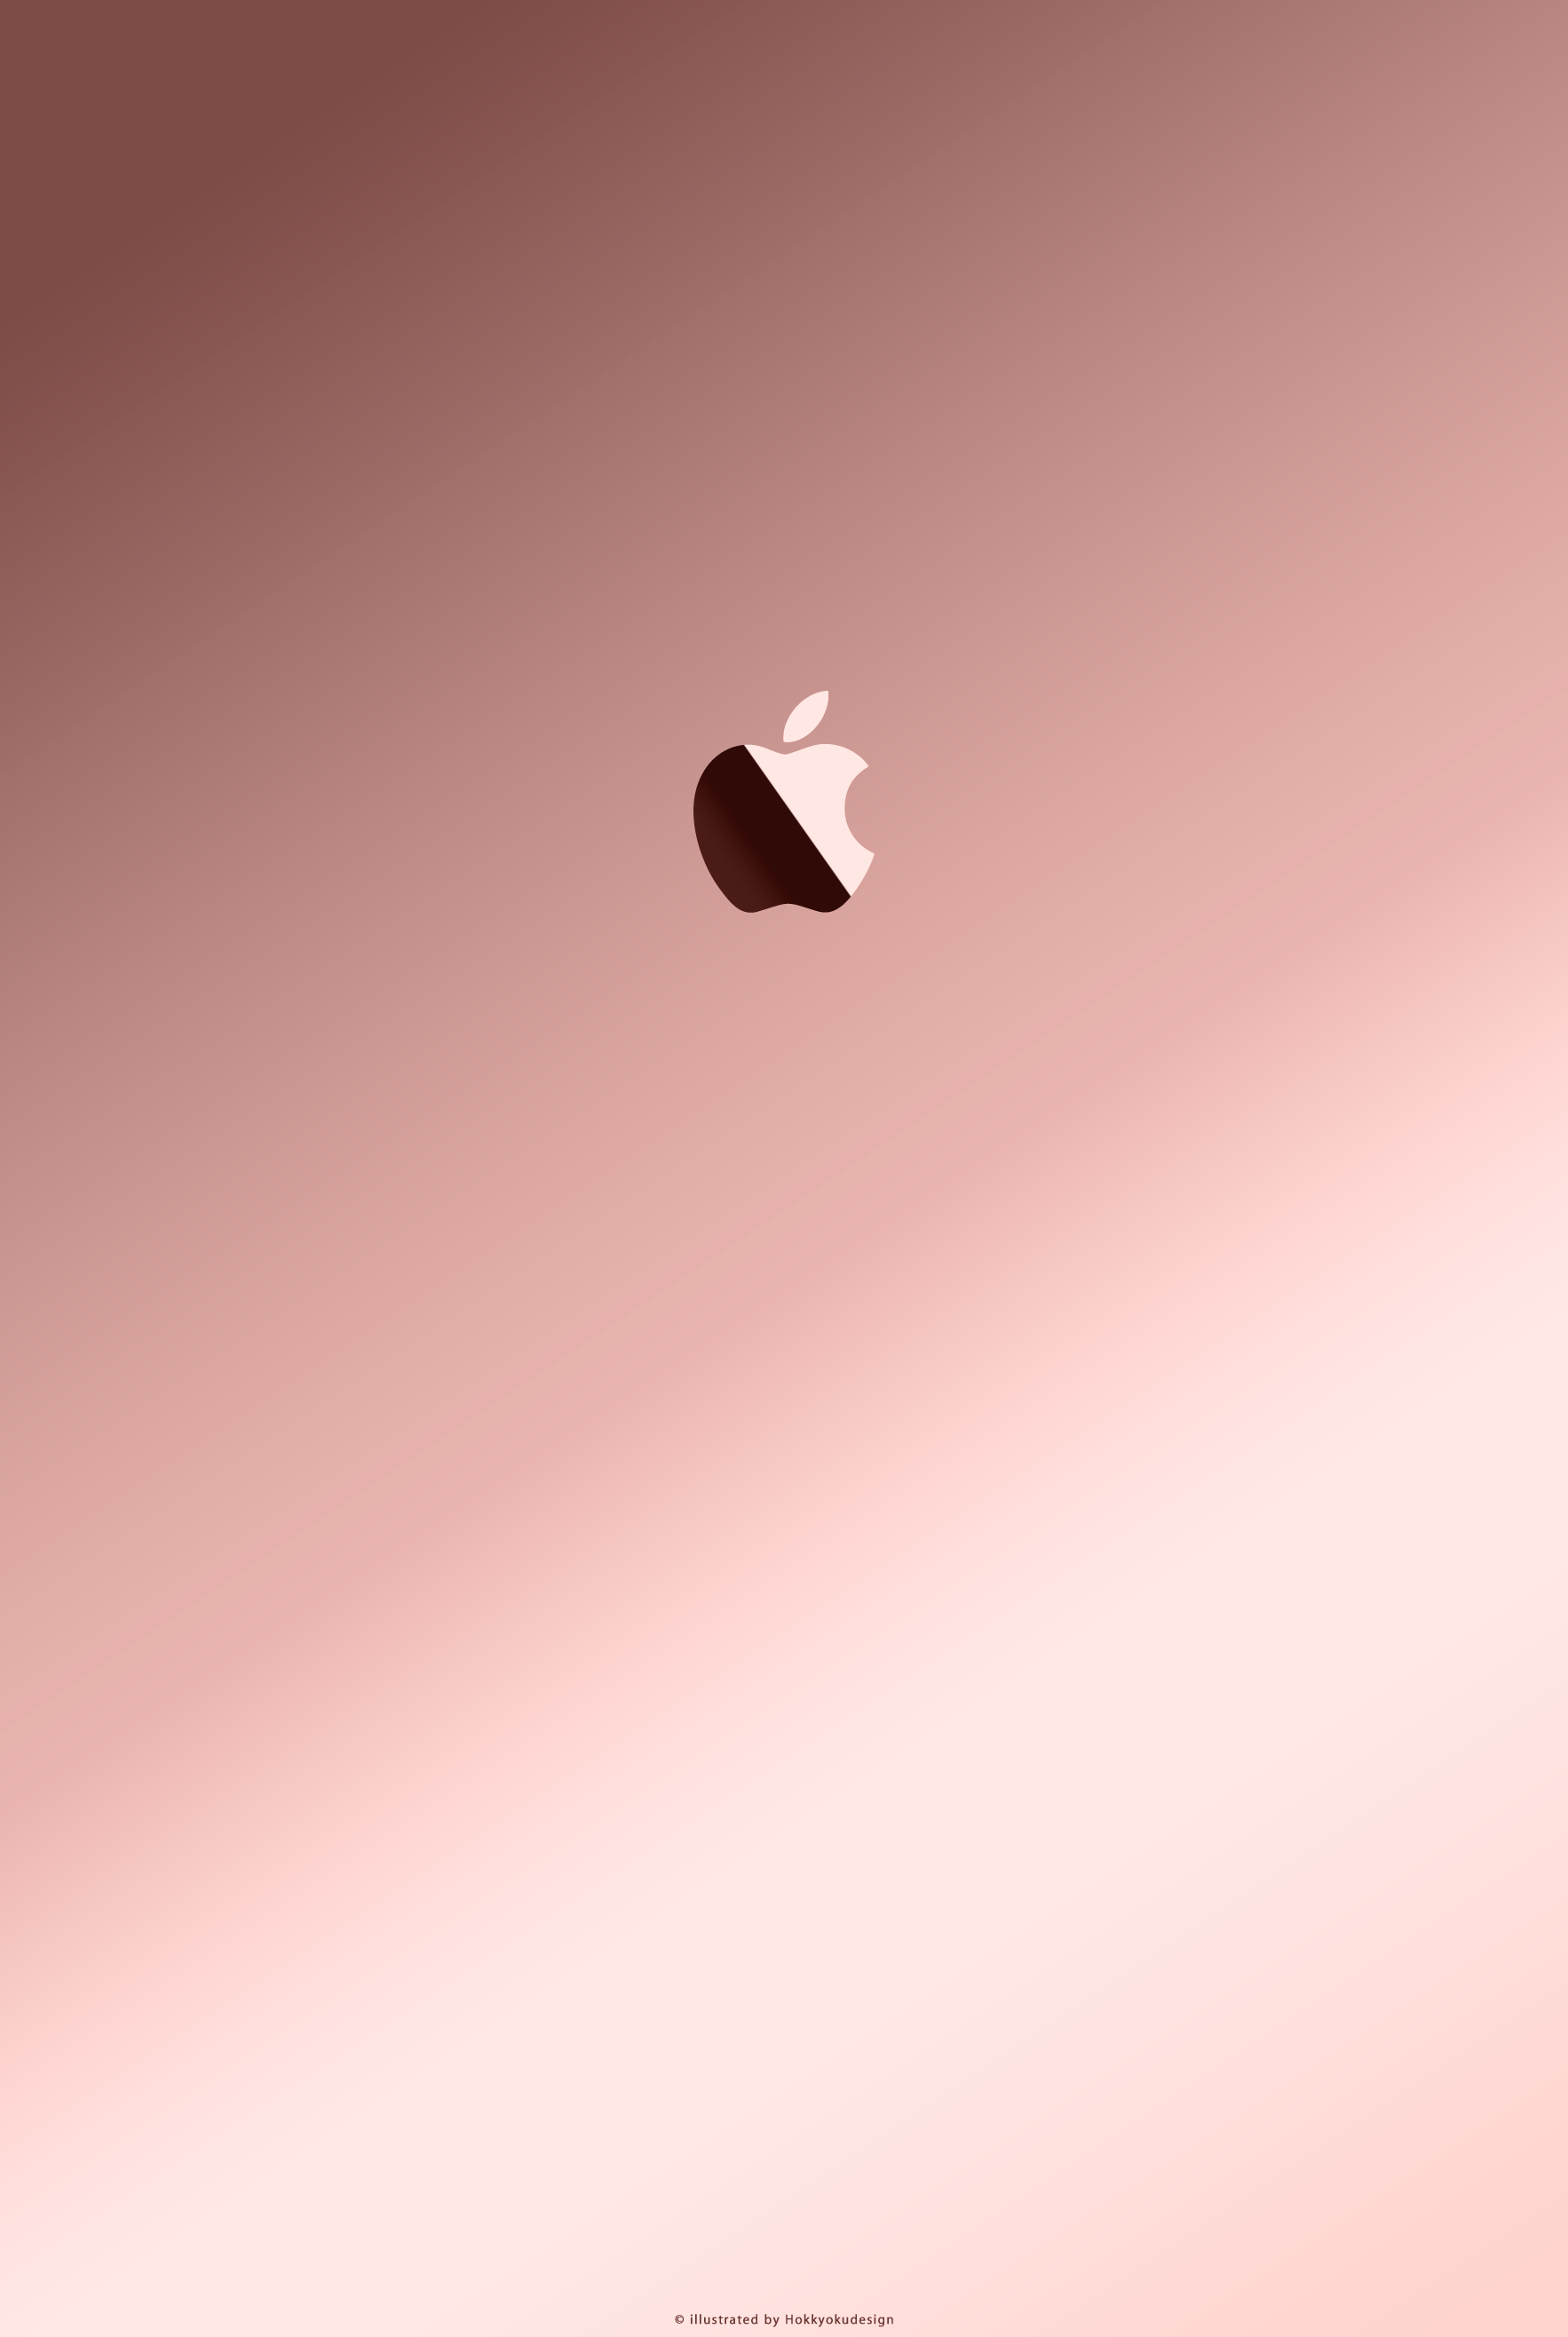 iPhoneiPadRose Gold with Apple3 Rose Gold wallpaper for